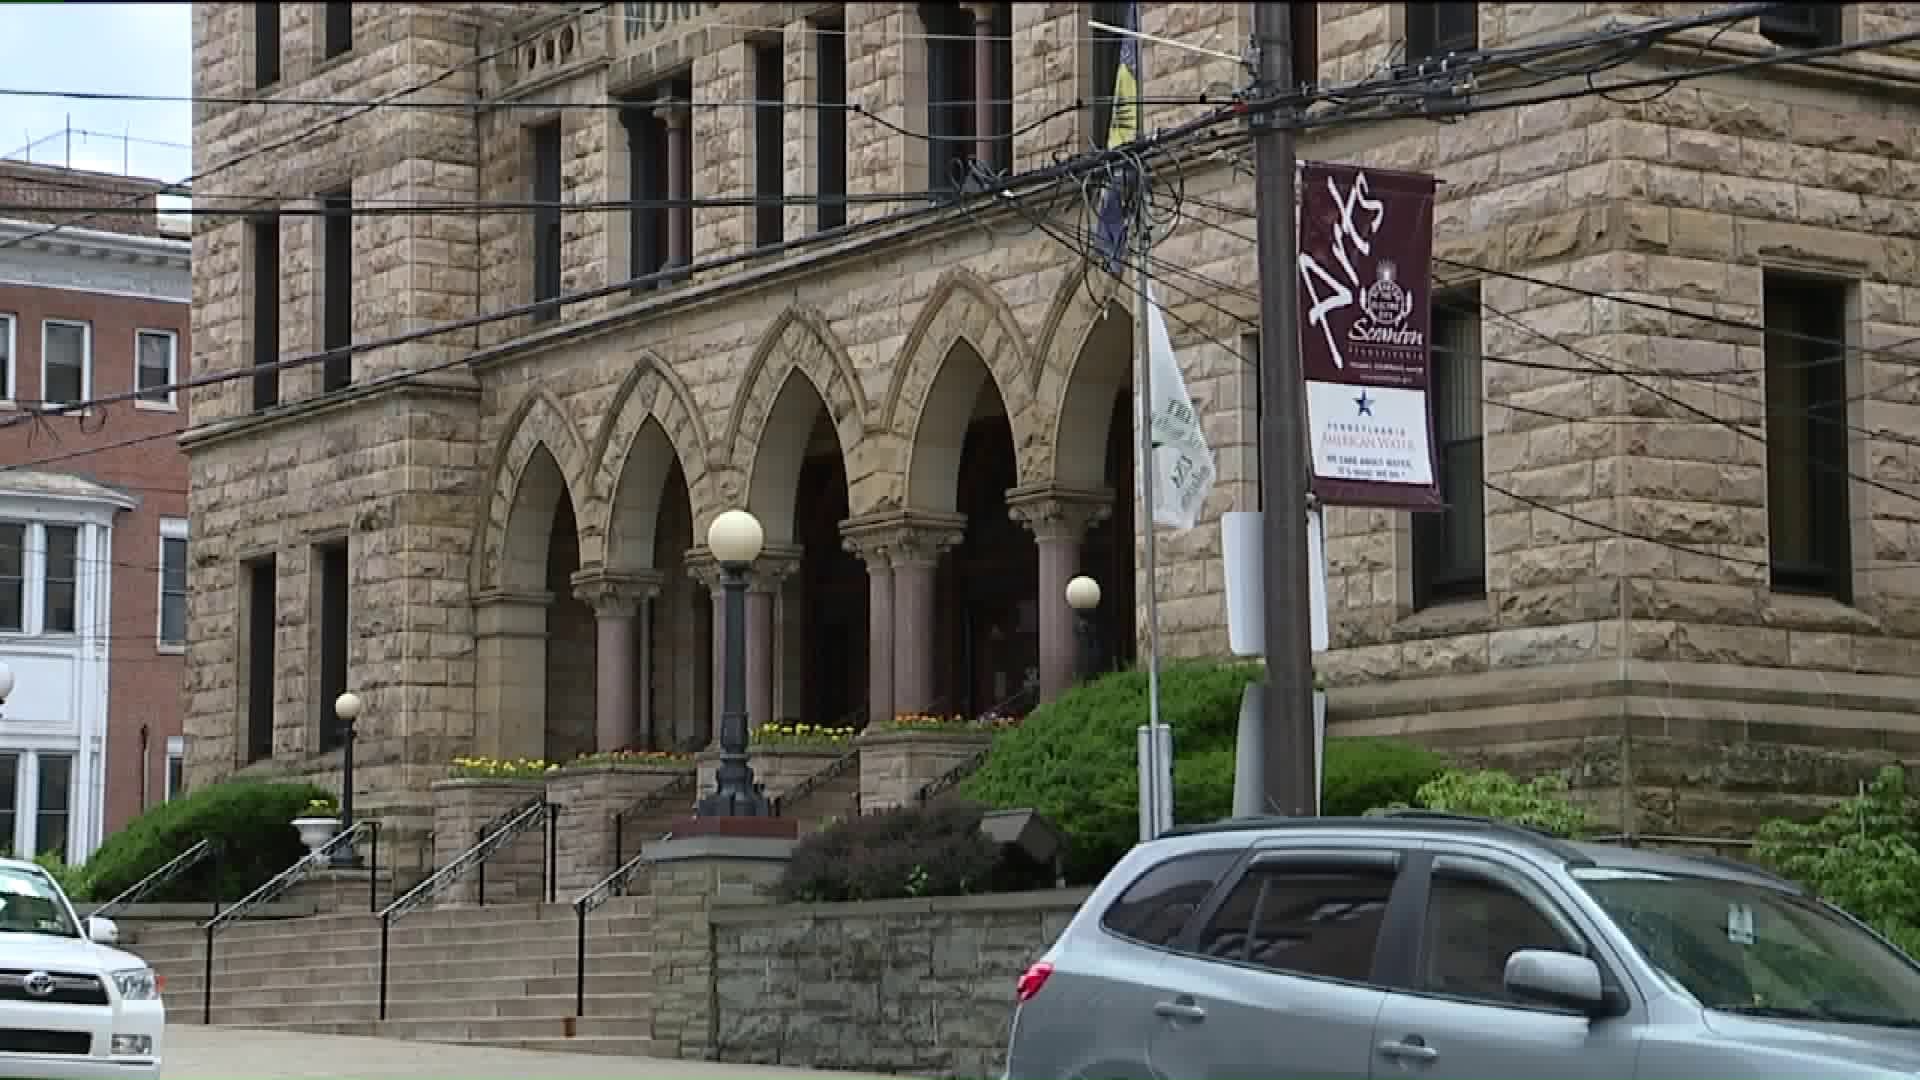 Distressed No More? State to Lay Out Exit Plan for Scranton